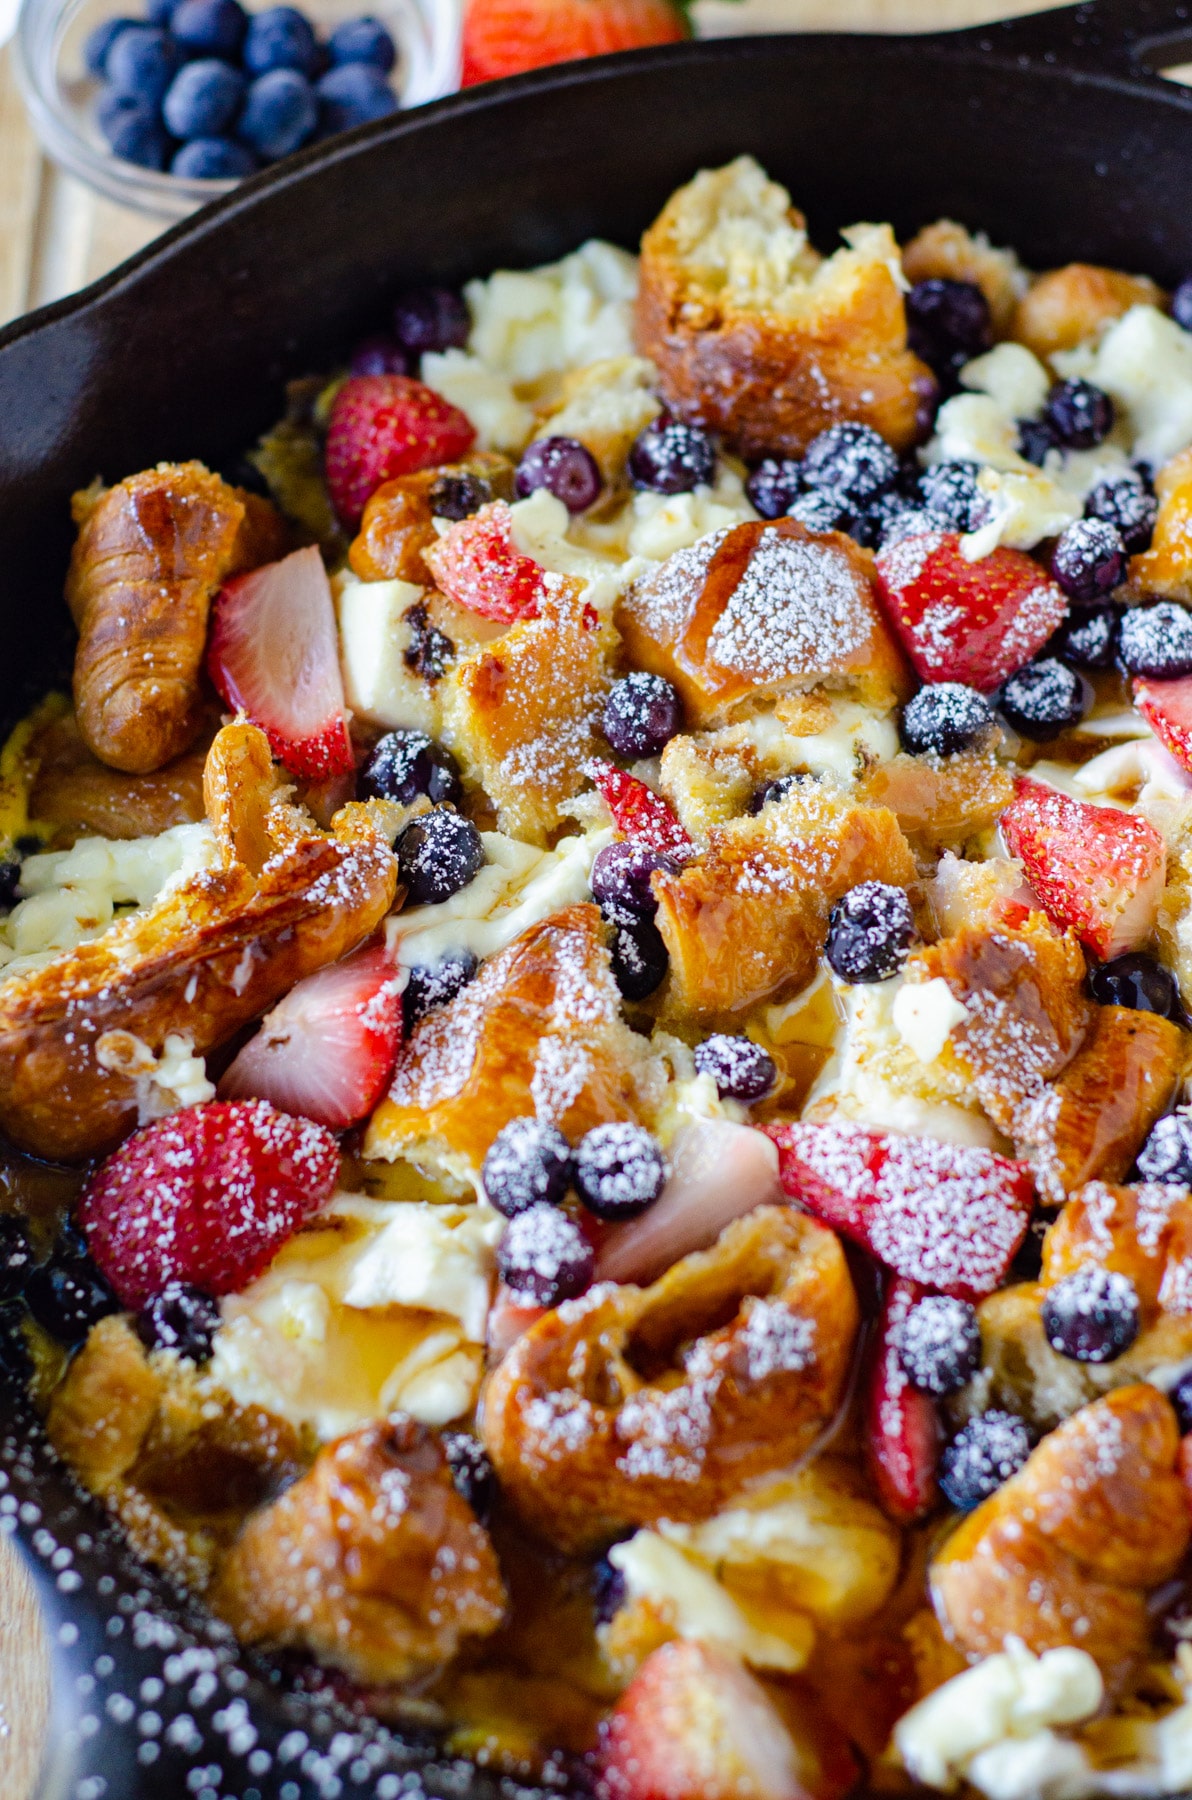 Croissant Breakfast Casserole served with strawberries and blueberries in a cast iron skillet.